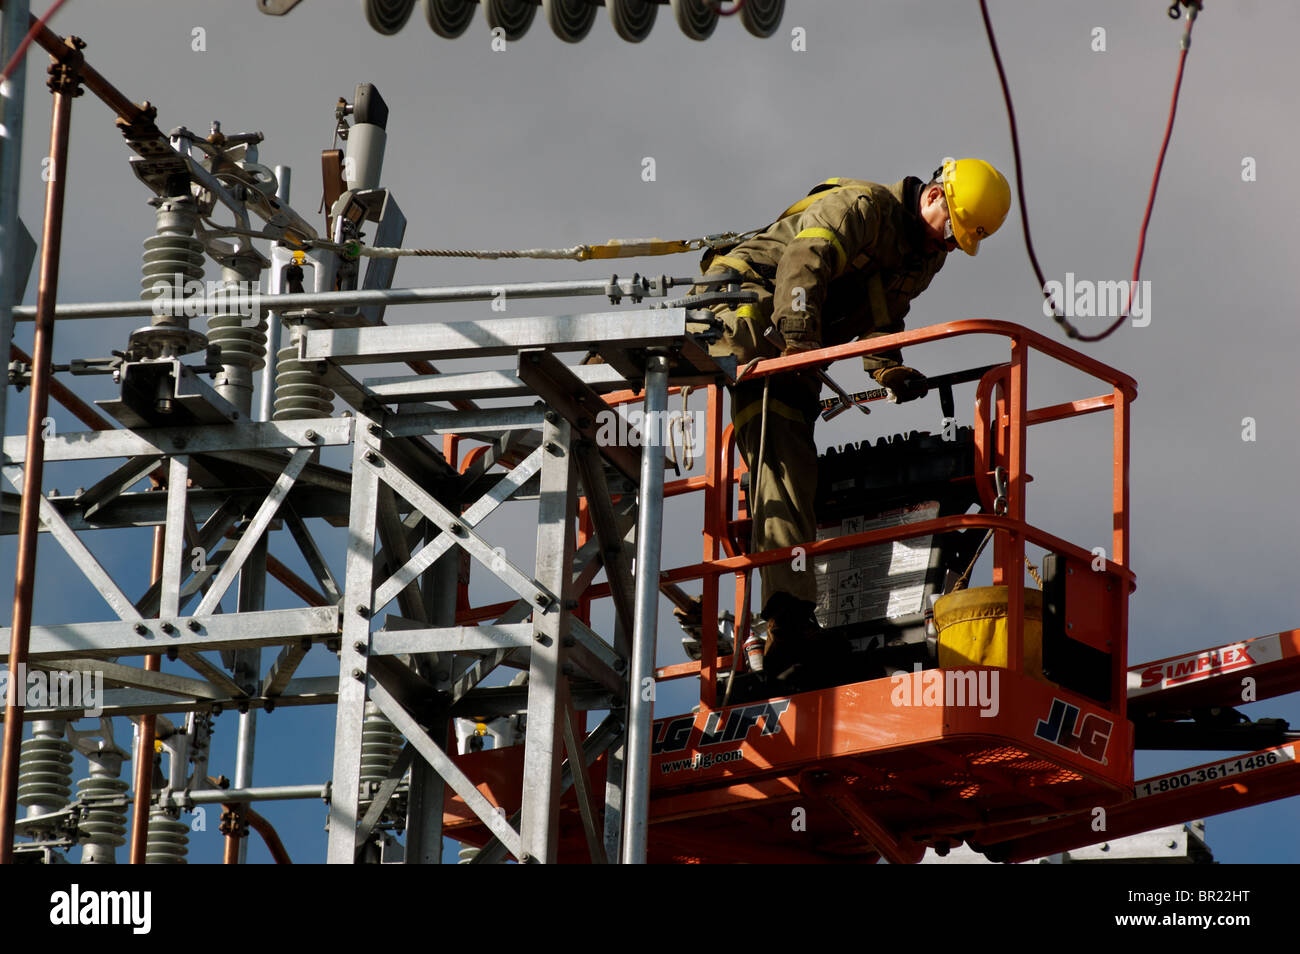 Man working on an electrical installation Stock Photo